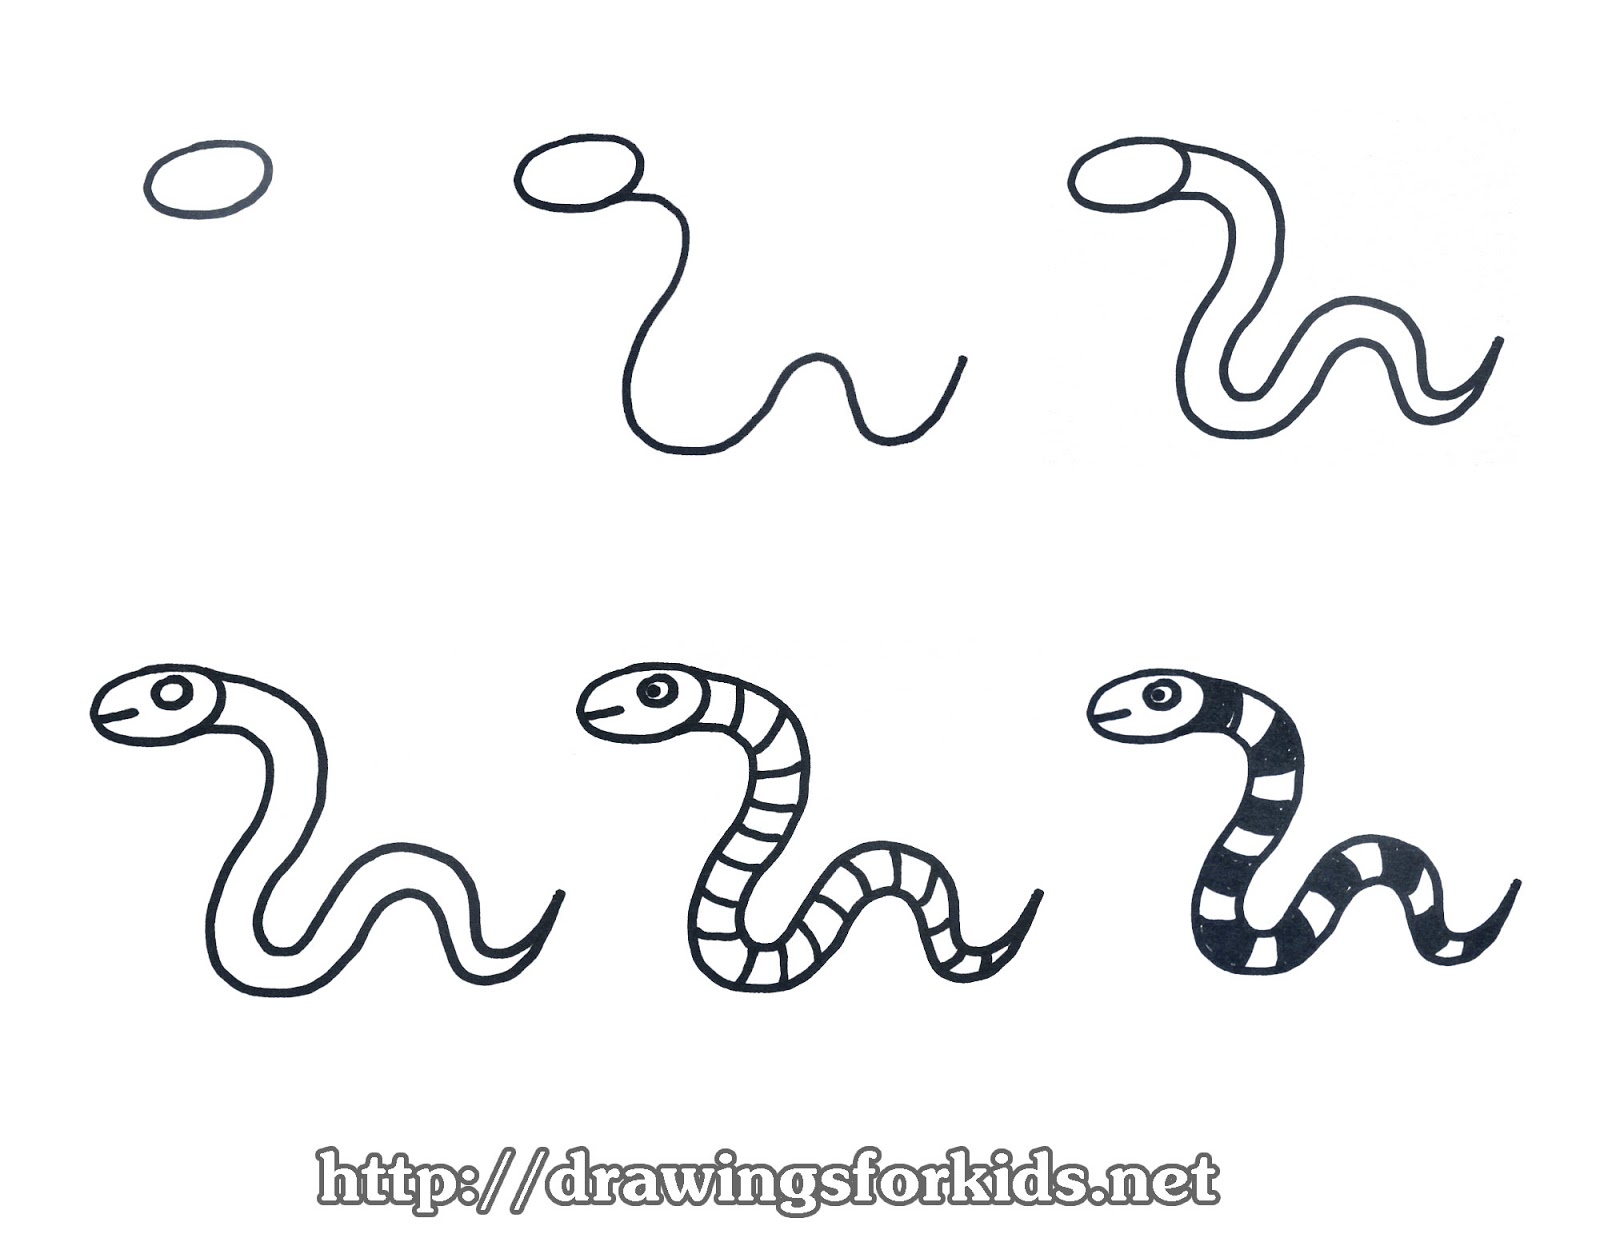 How to draw a snake for kids 